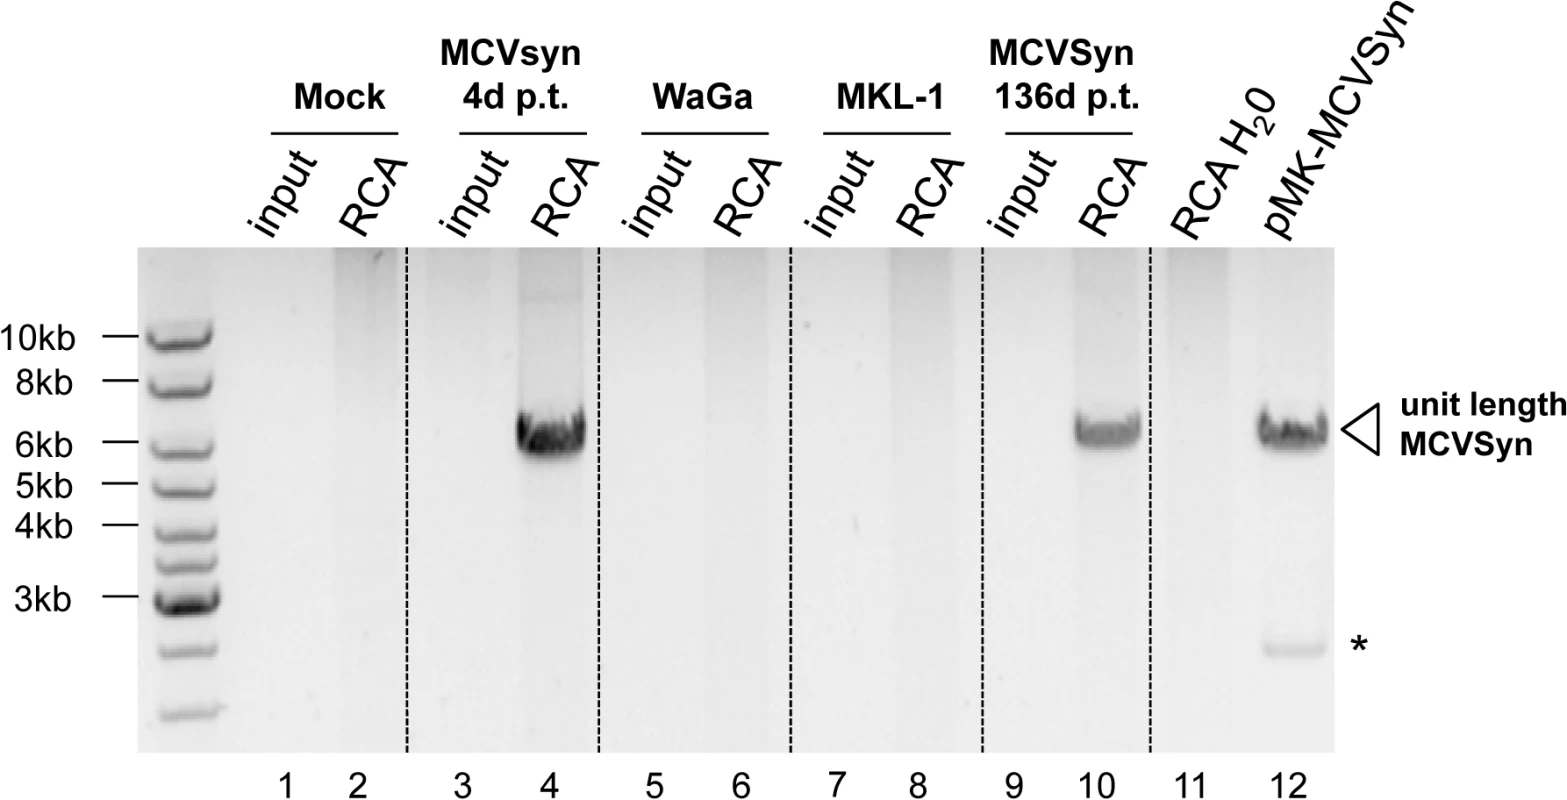 RCA analysis suggests episomal persistence of MCVSyn genomes.